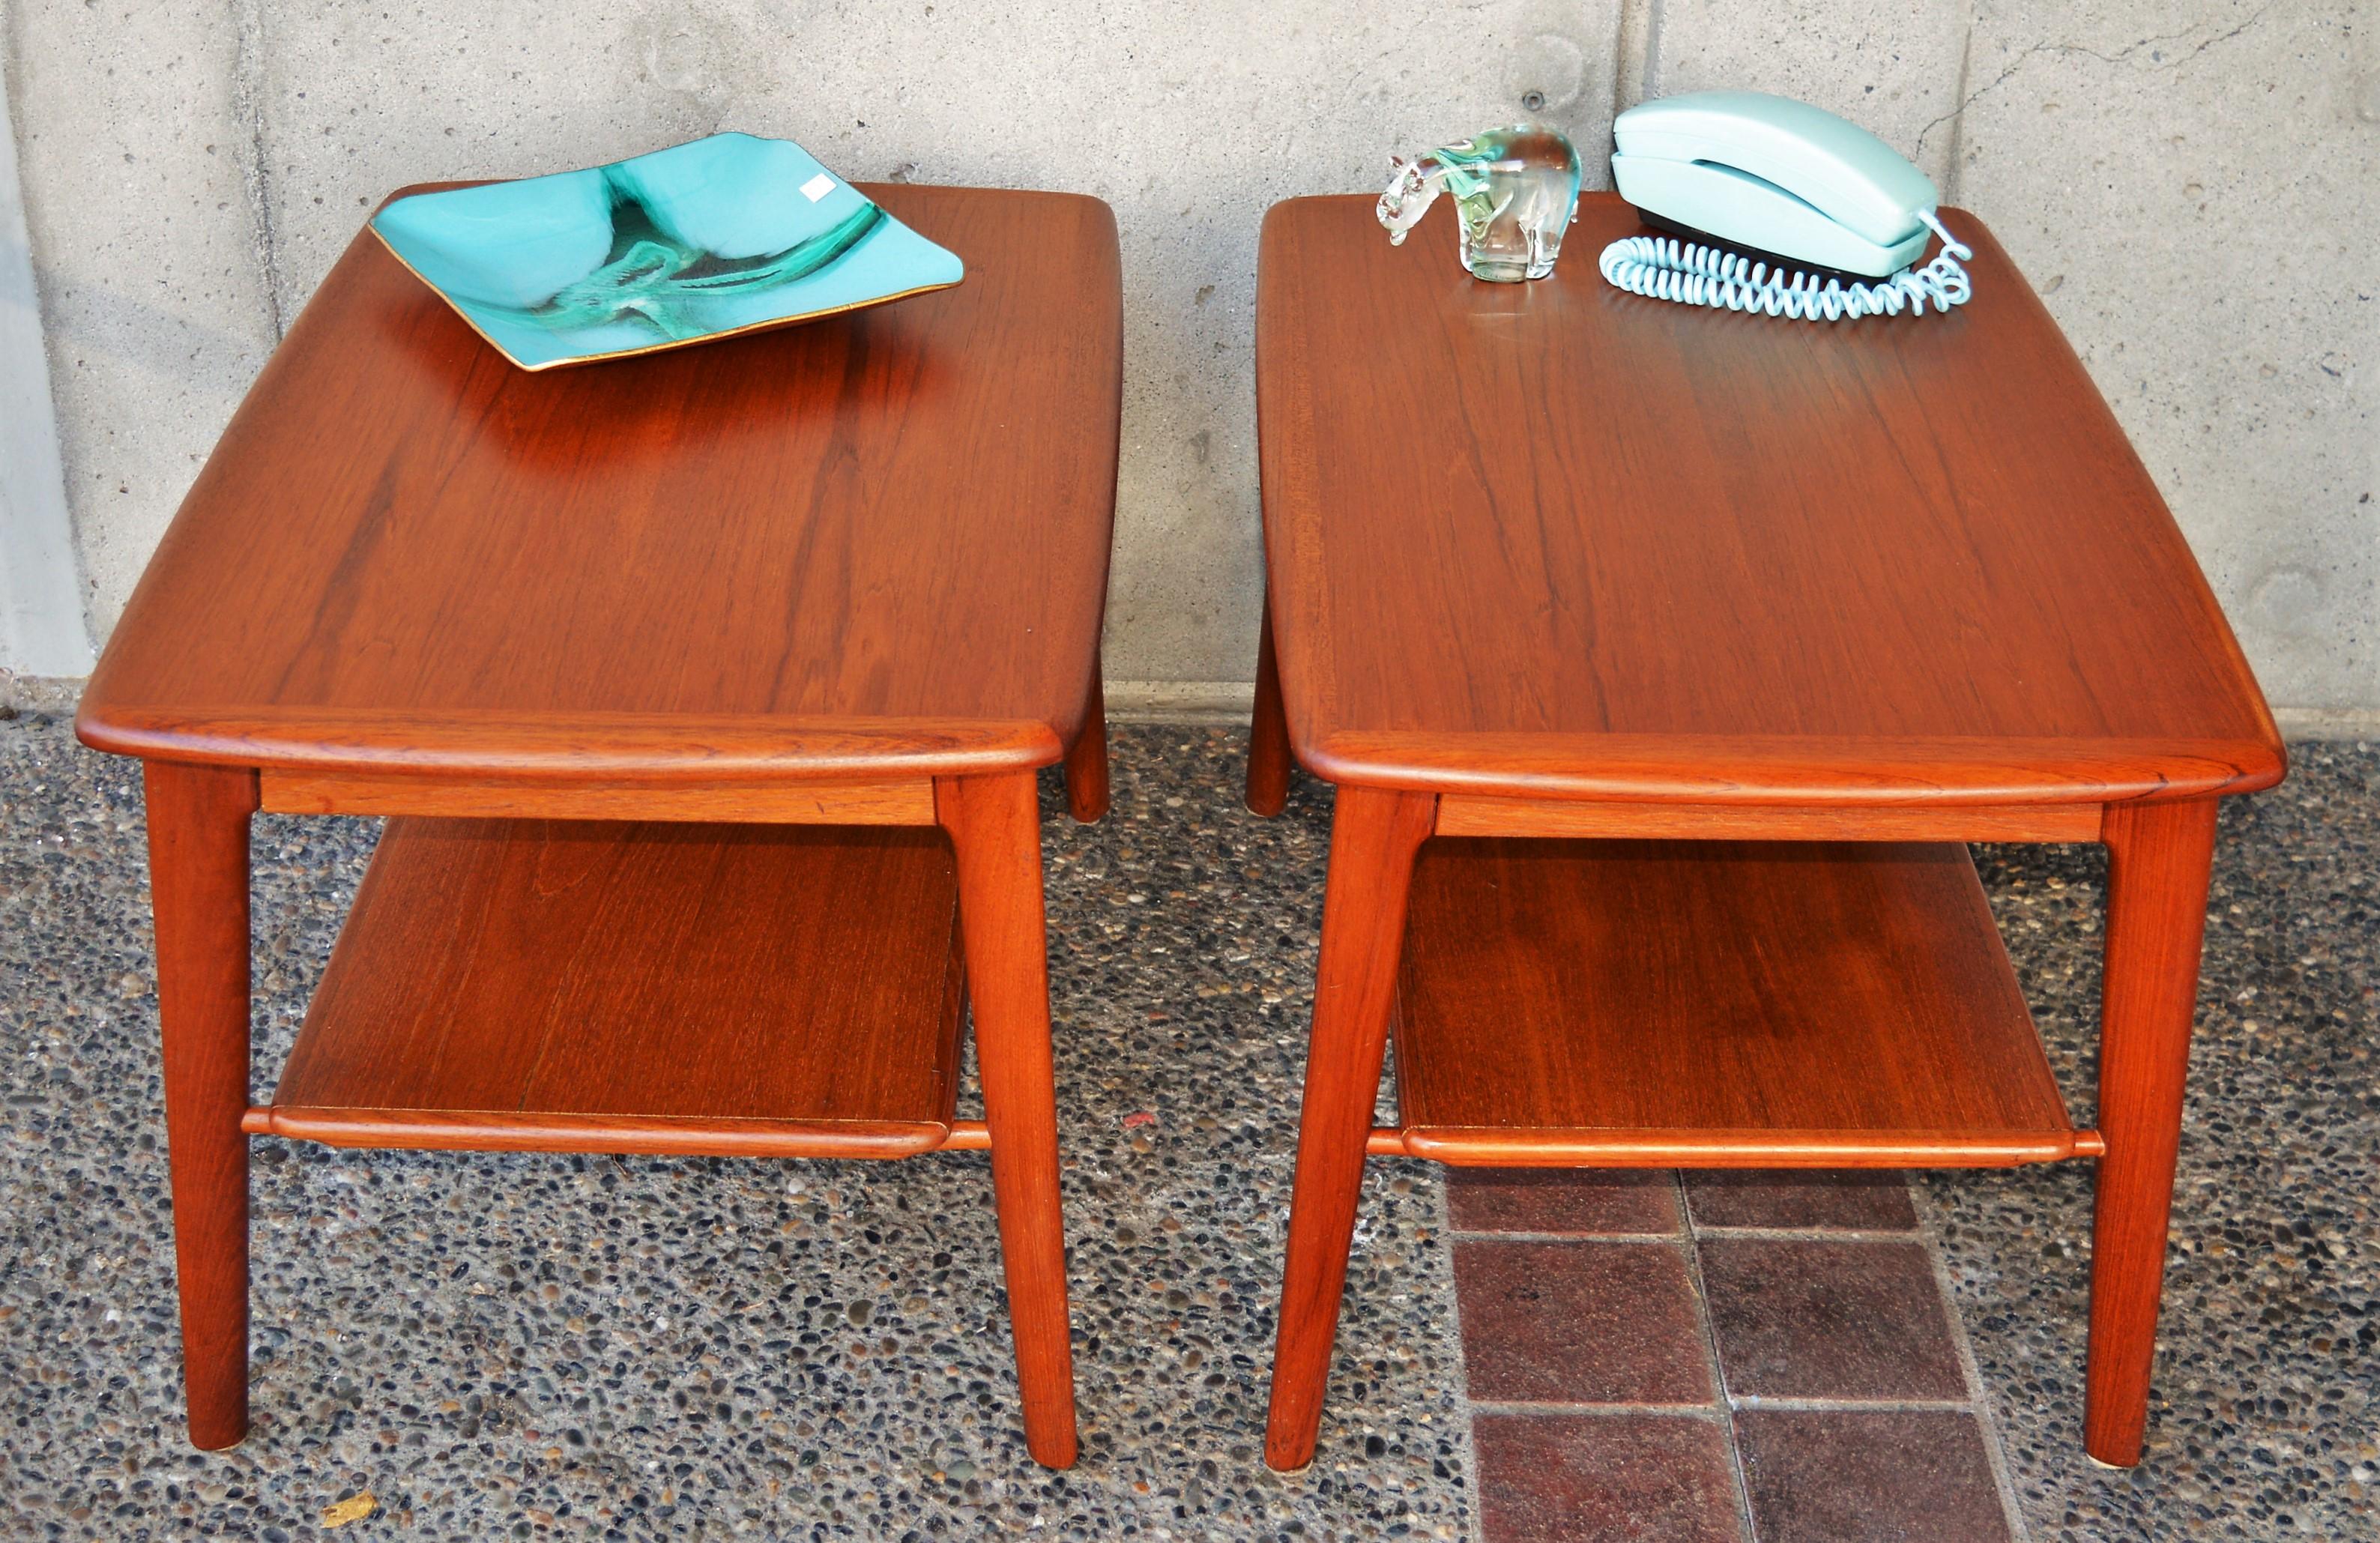 Mid-Century Modern Pair of Quality Teak Side Tables or Nightstands by Svend Madsen W/Shelf & Drawer